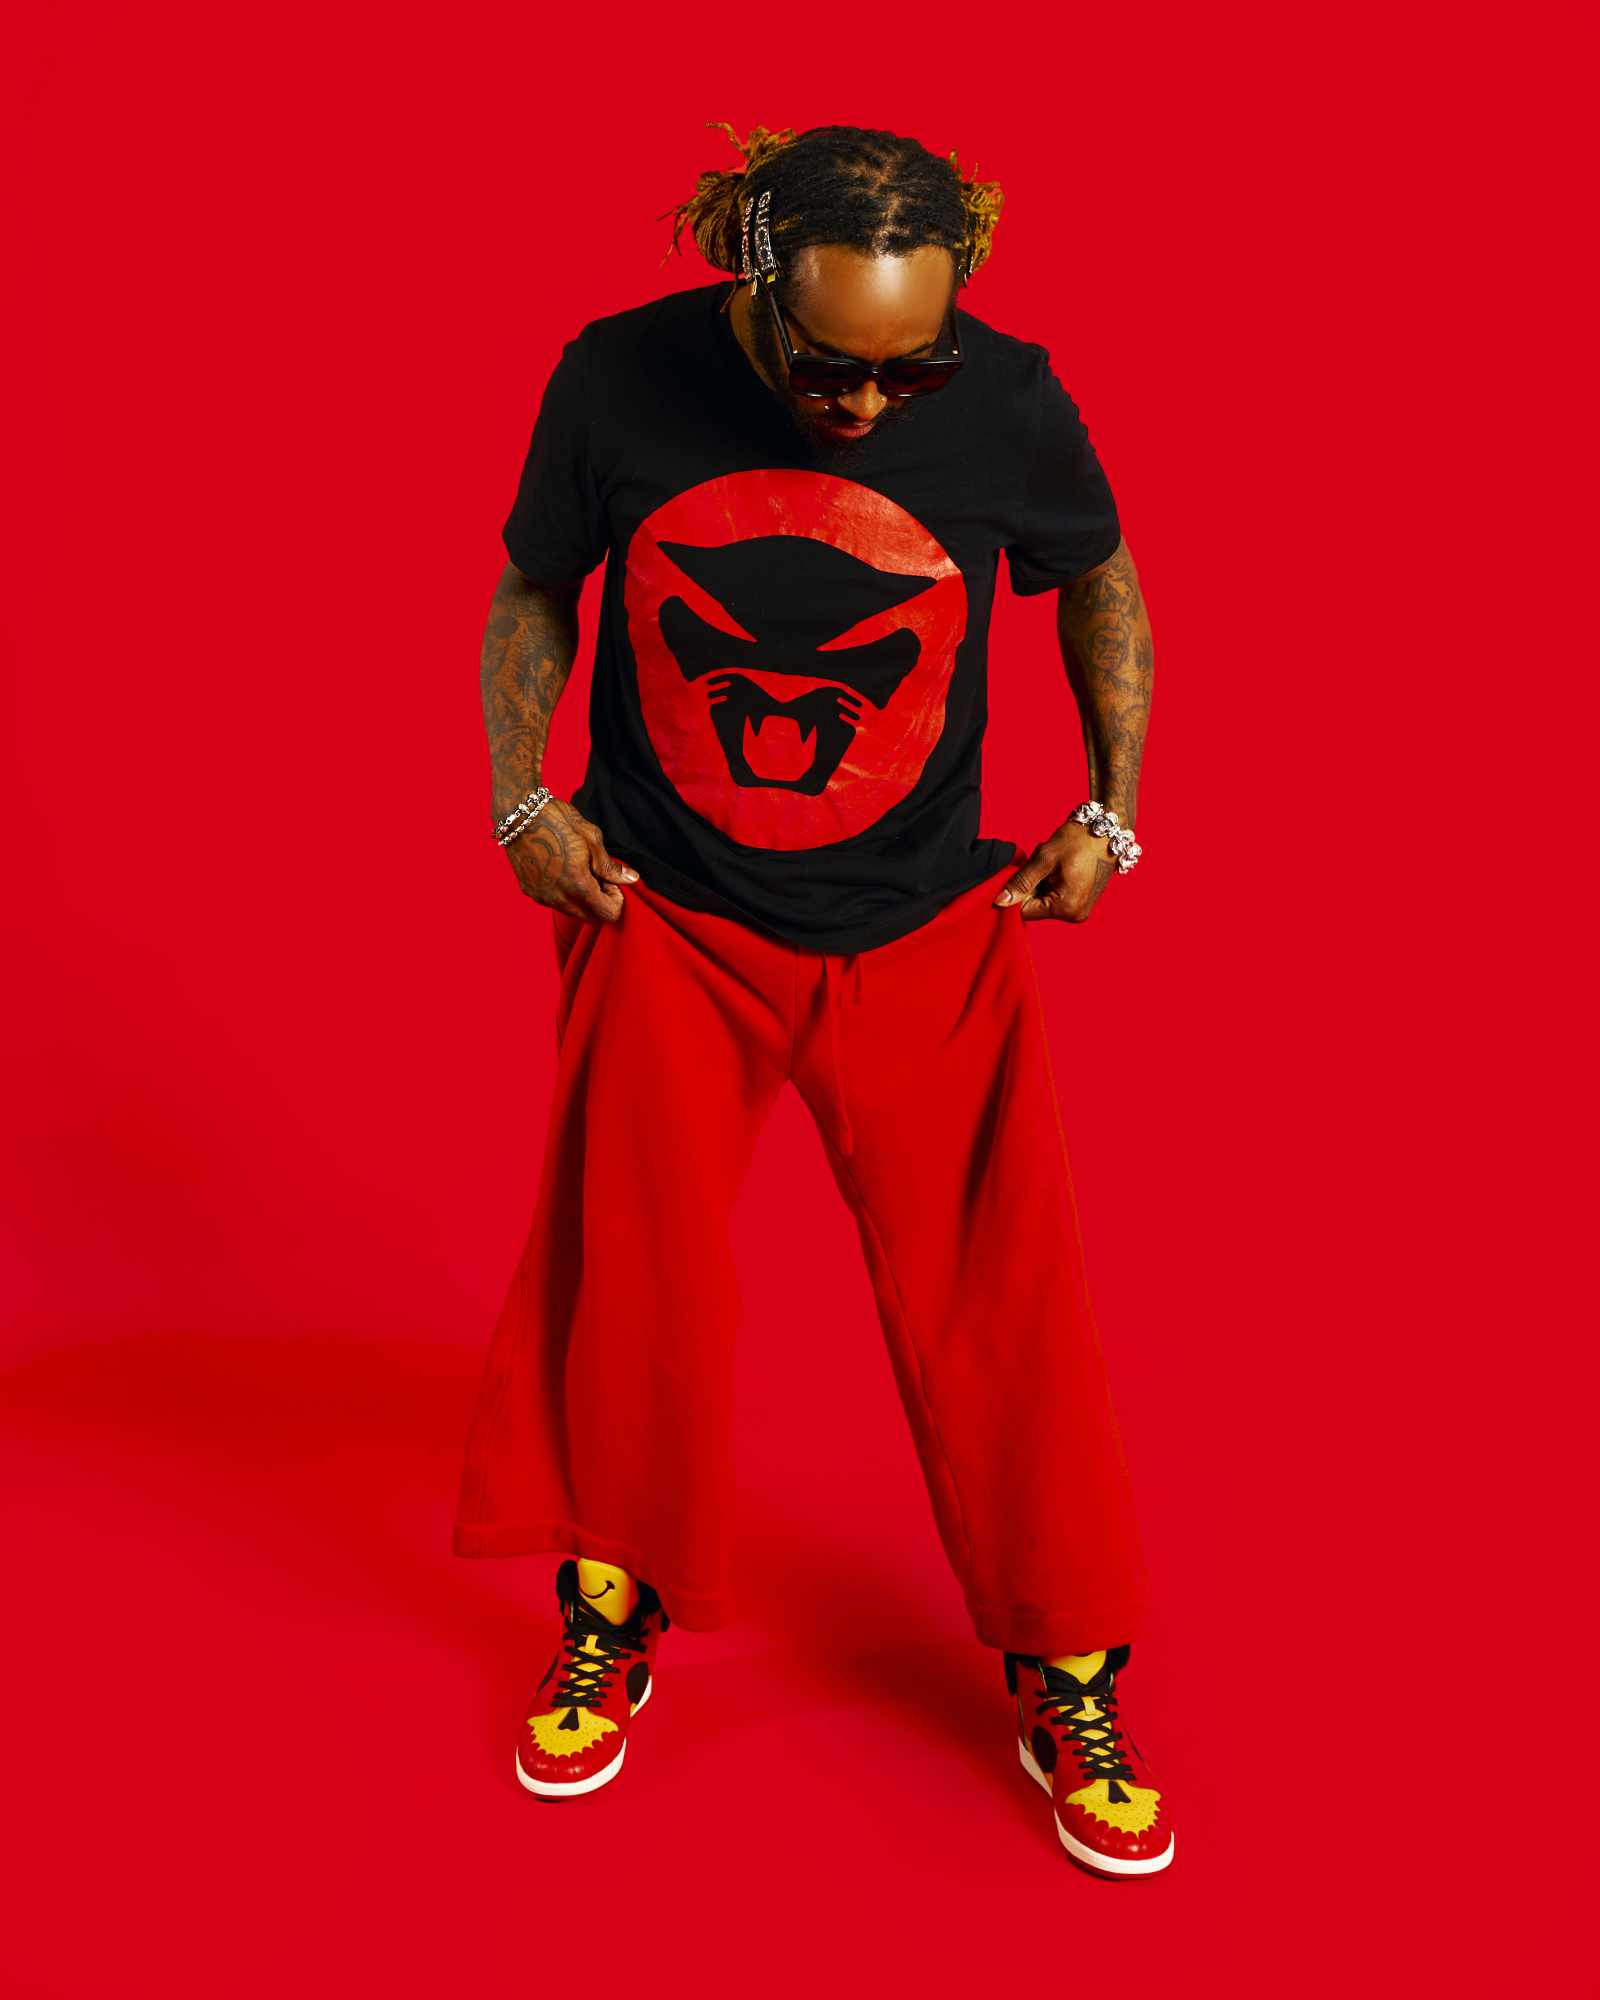 Thundercat wears his own clothing line